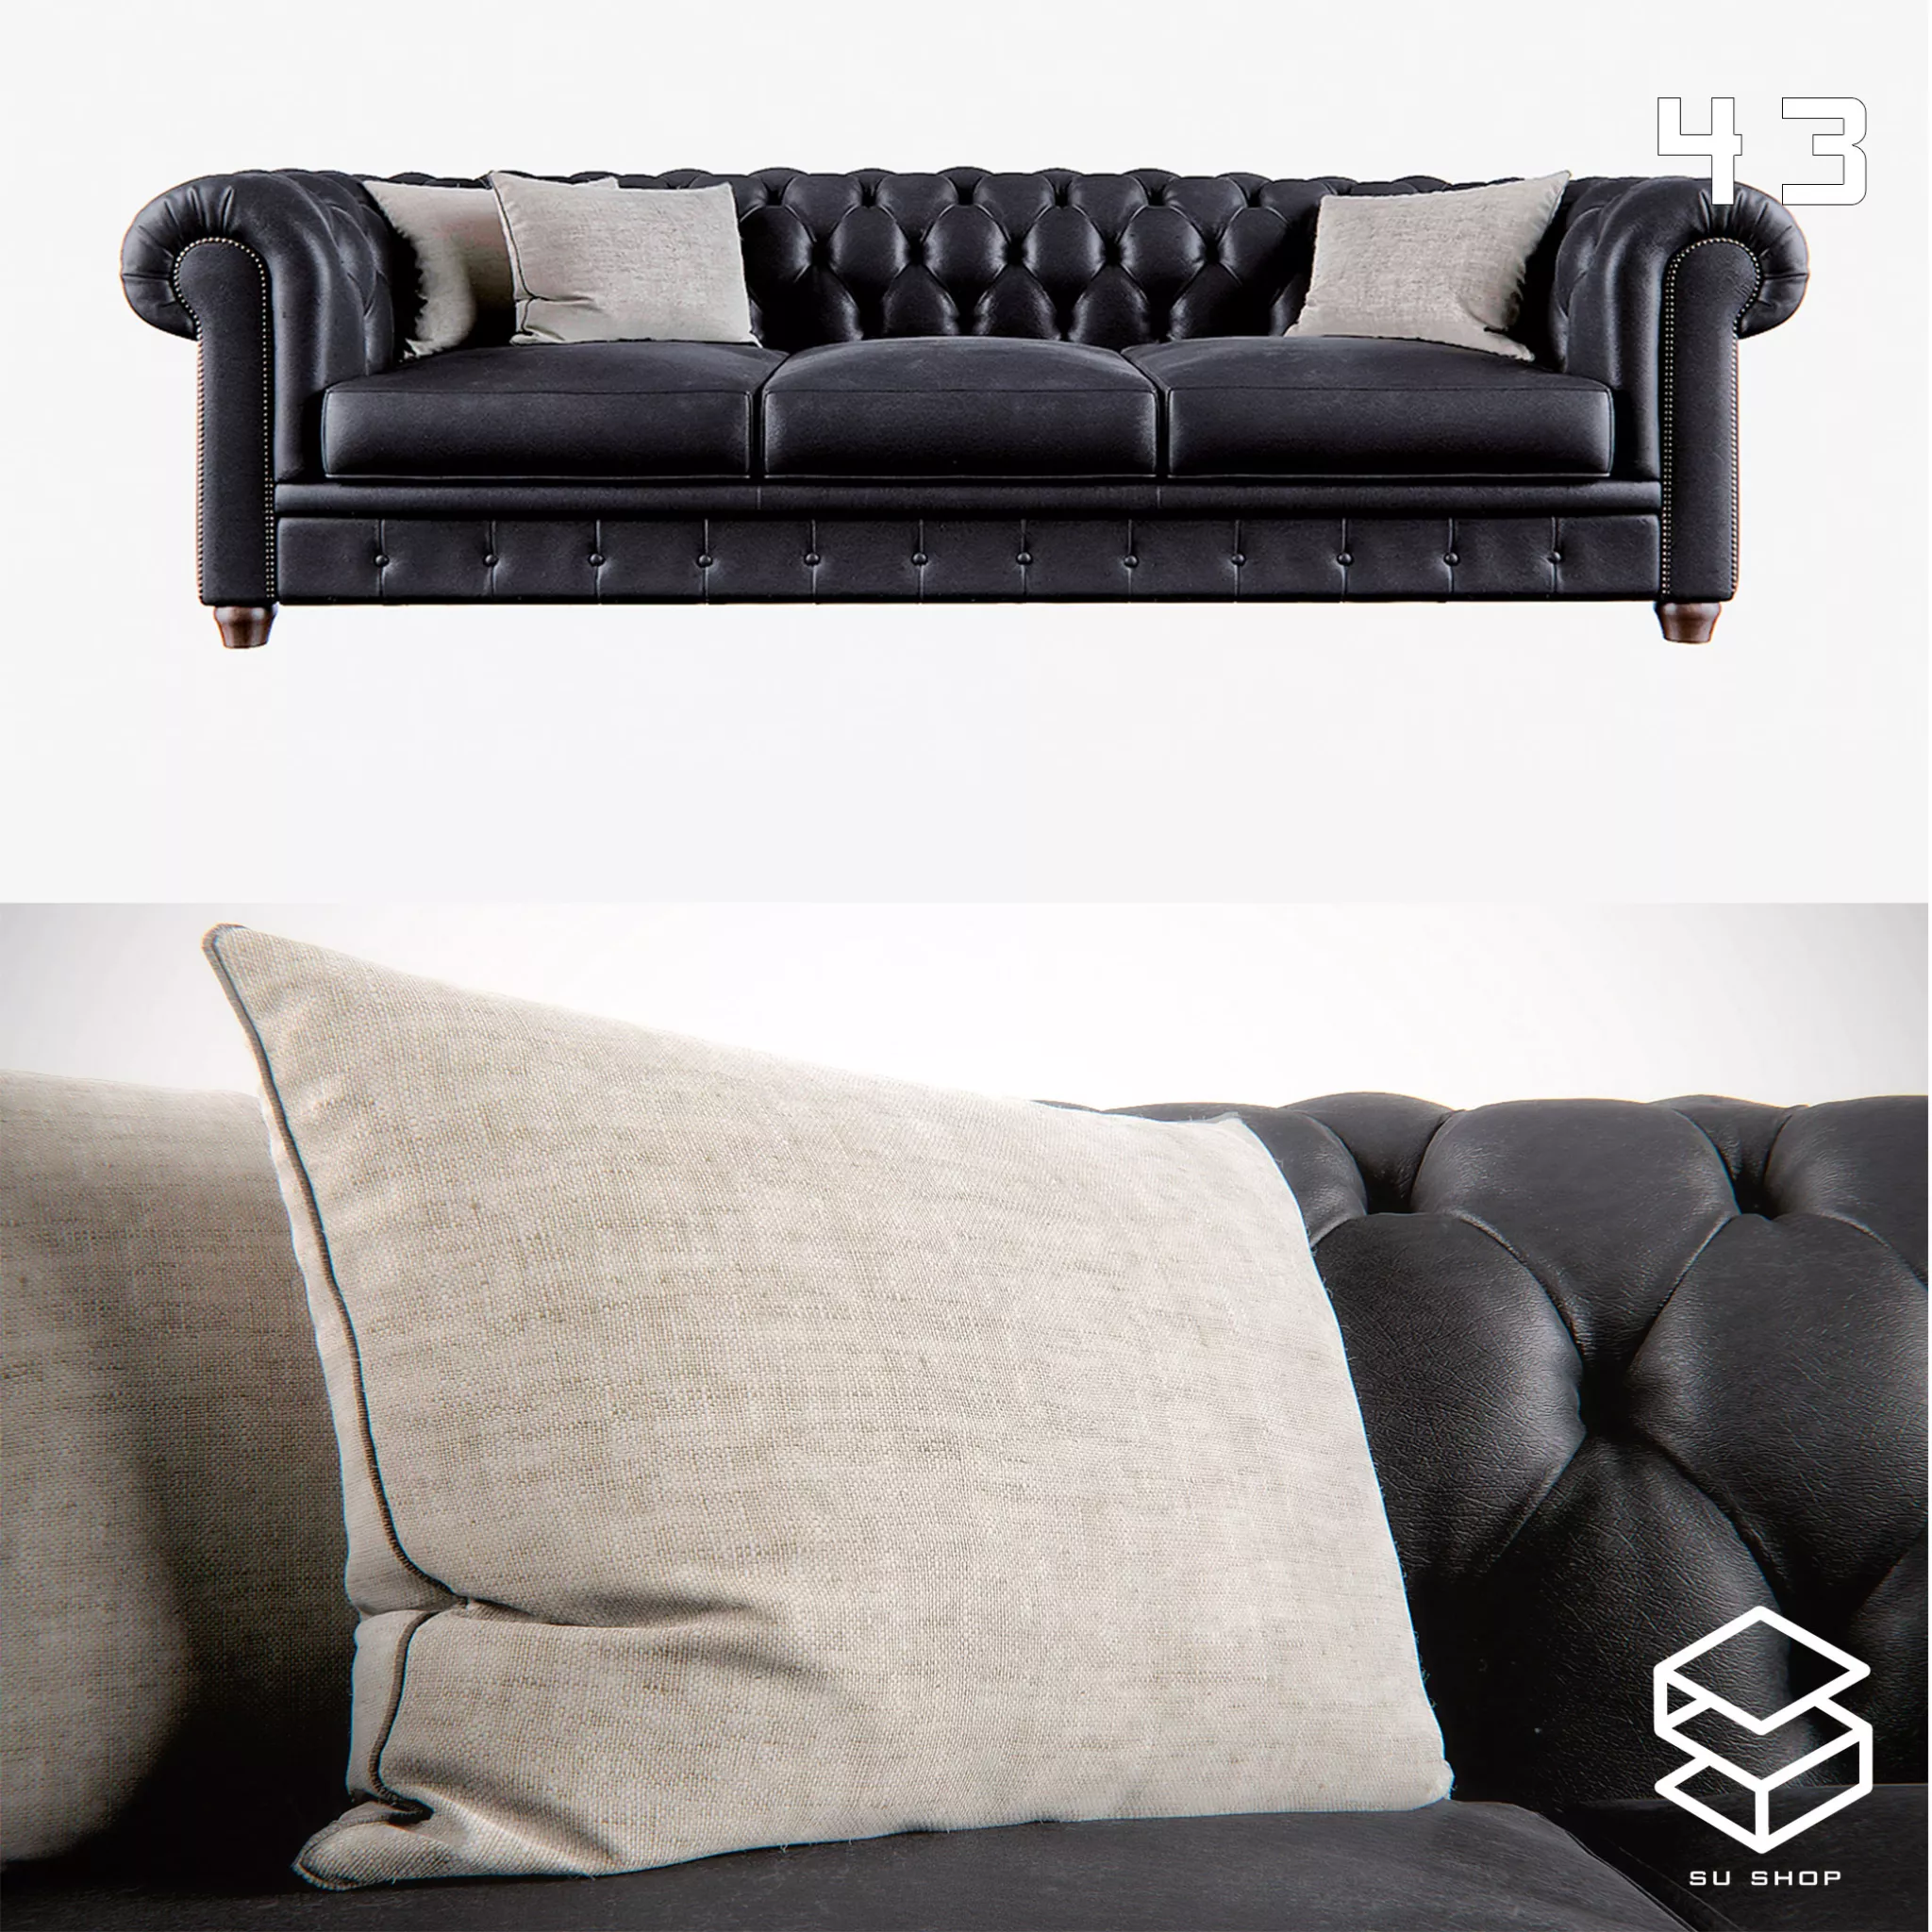 MODERN SOFA - SKETCHUP 3D MODEL - VRAY OR ENSCAPE - ID13667